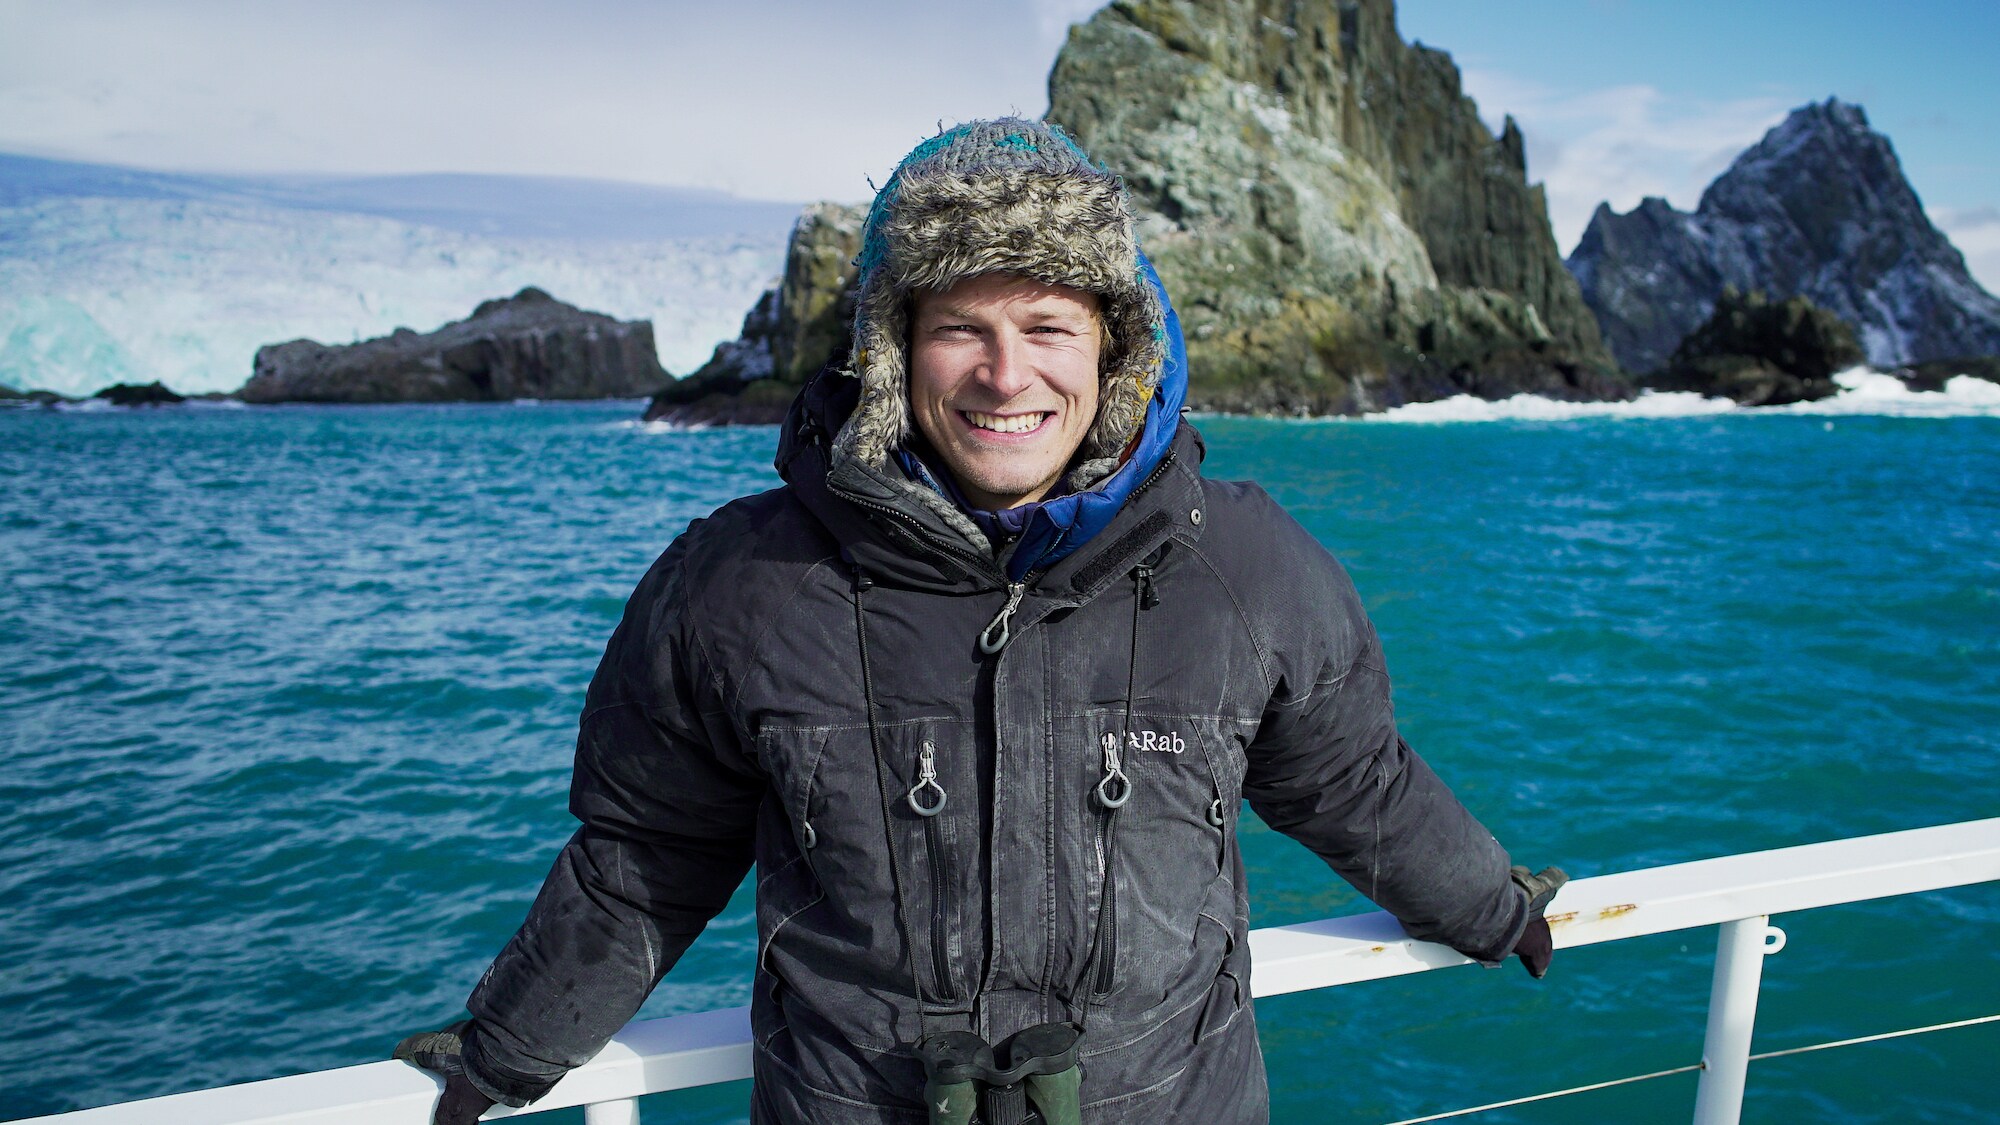 Bertie Gregory on his way to film a gathering of fin whales off Elephant Island, Antarctica. (Credit: National Geographic/Will West for Disney+)